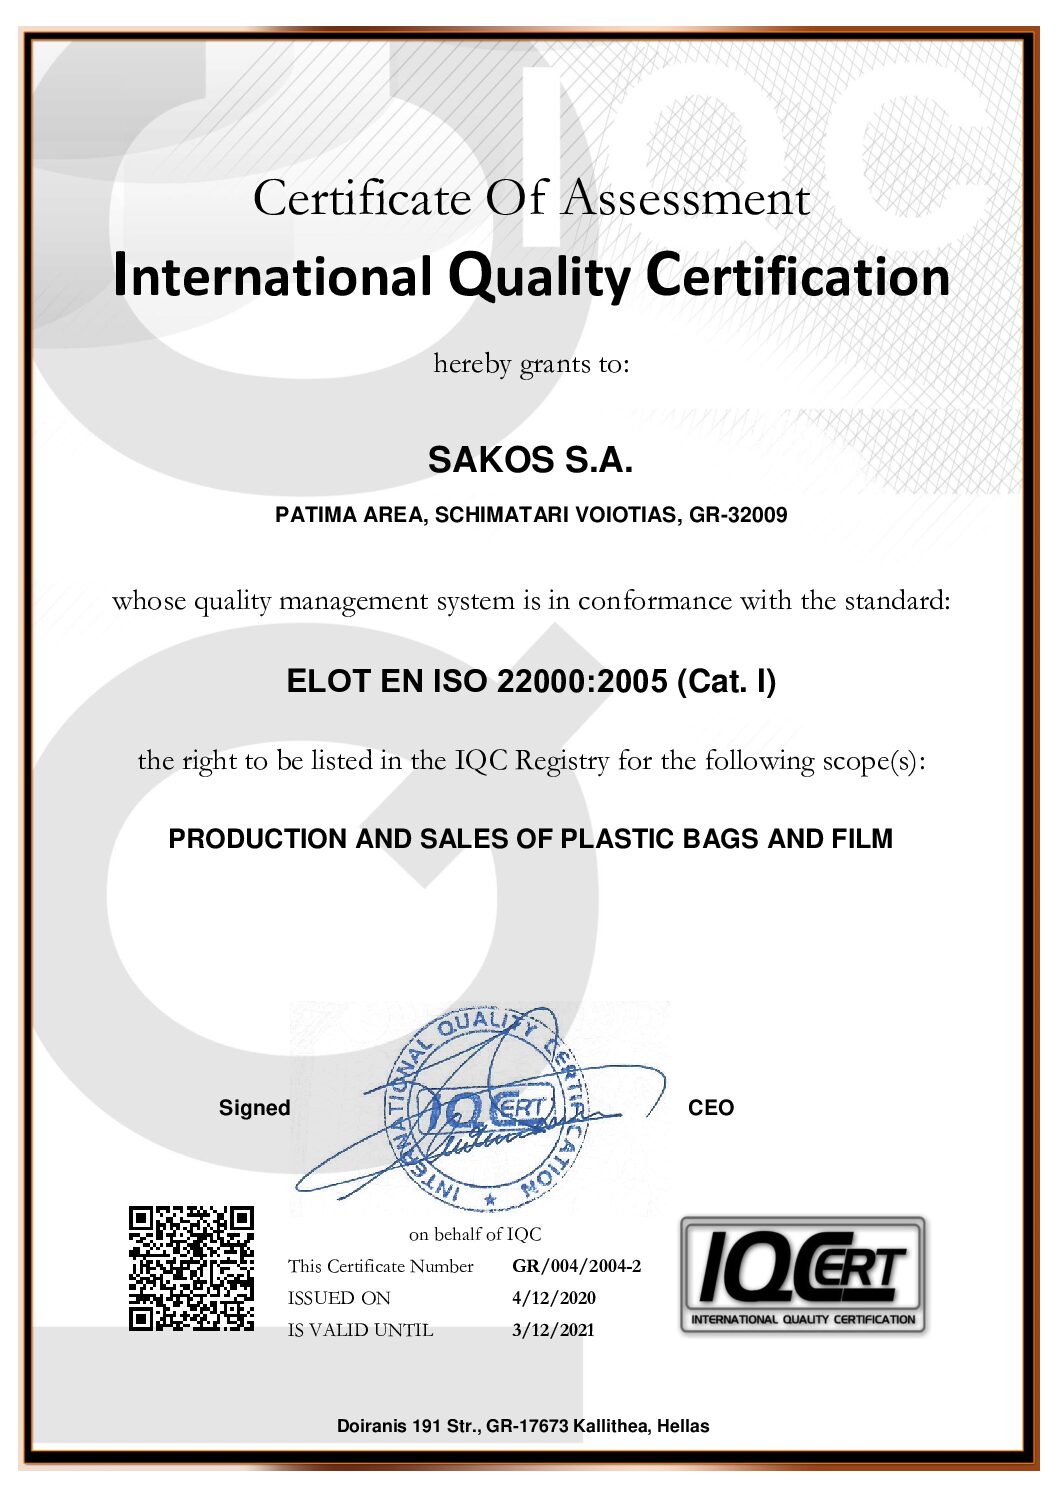 SAKOS S.A. - Production and trade of plastic flexible packaging material